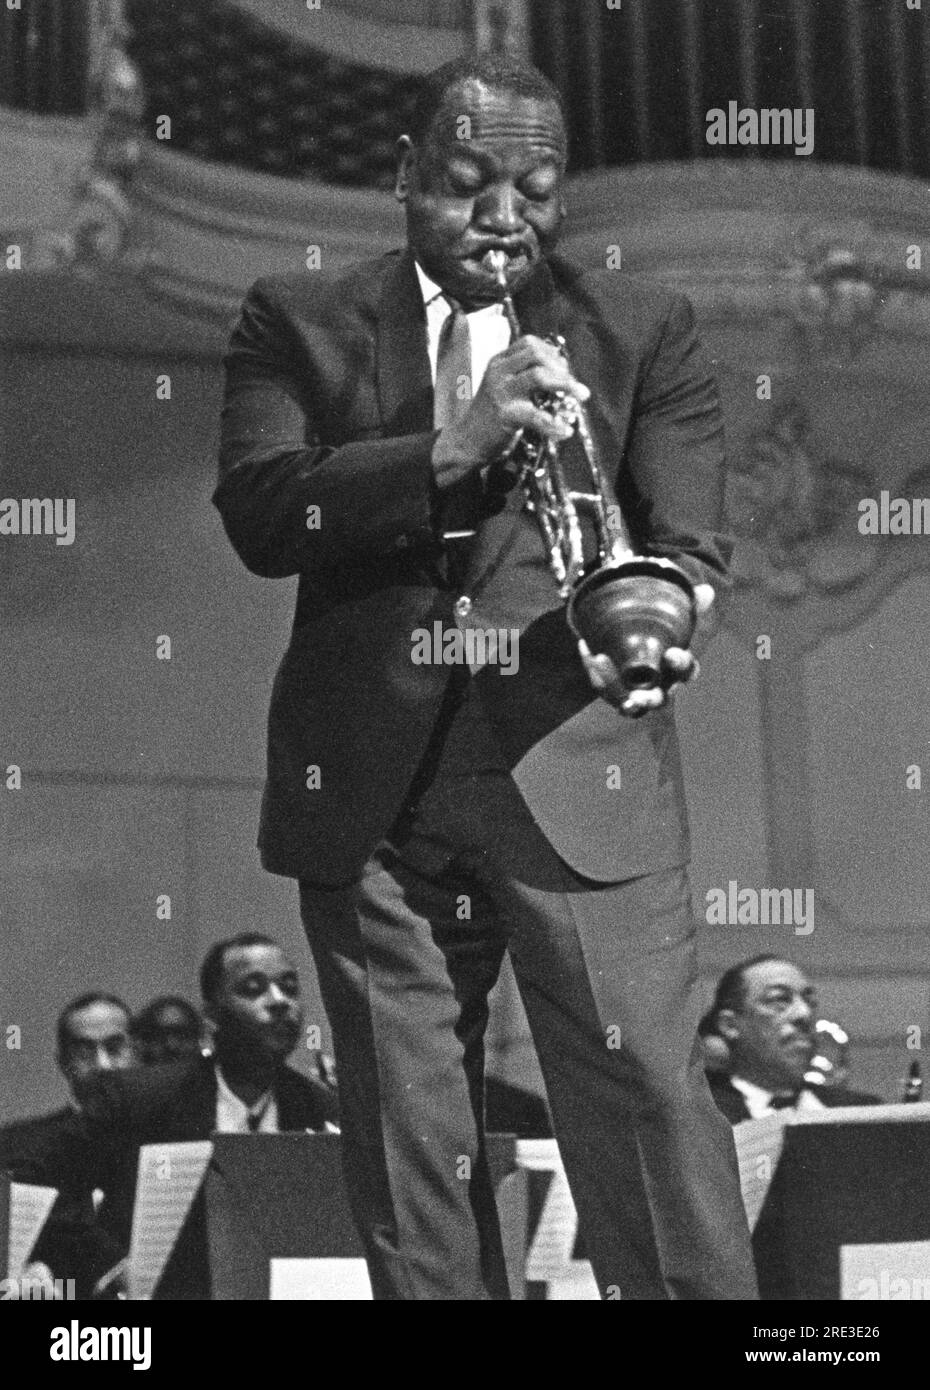 Williams, Charles Melvin 'Cootie', 10.7.1911 - 15,9.1985, amerikanischer Musiker (Trompeter), ADDITIONAL-RIGHTS-CLEARANCE-INFO-NOT-AVAILABLE Stockfoto